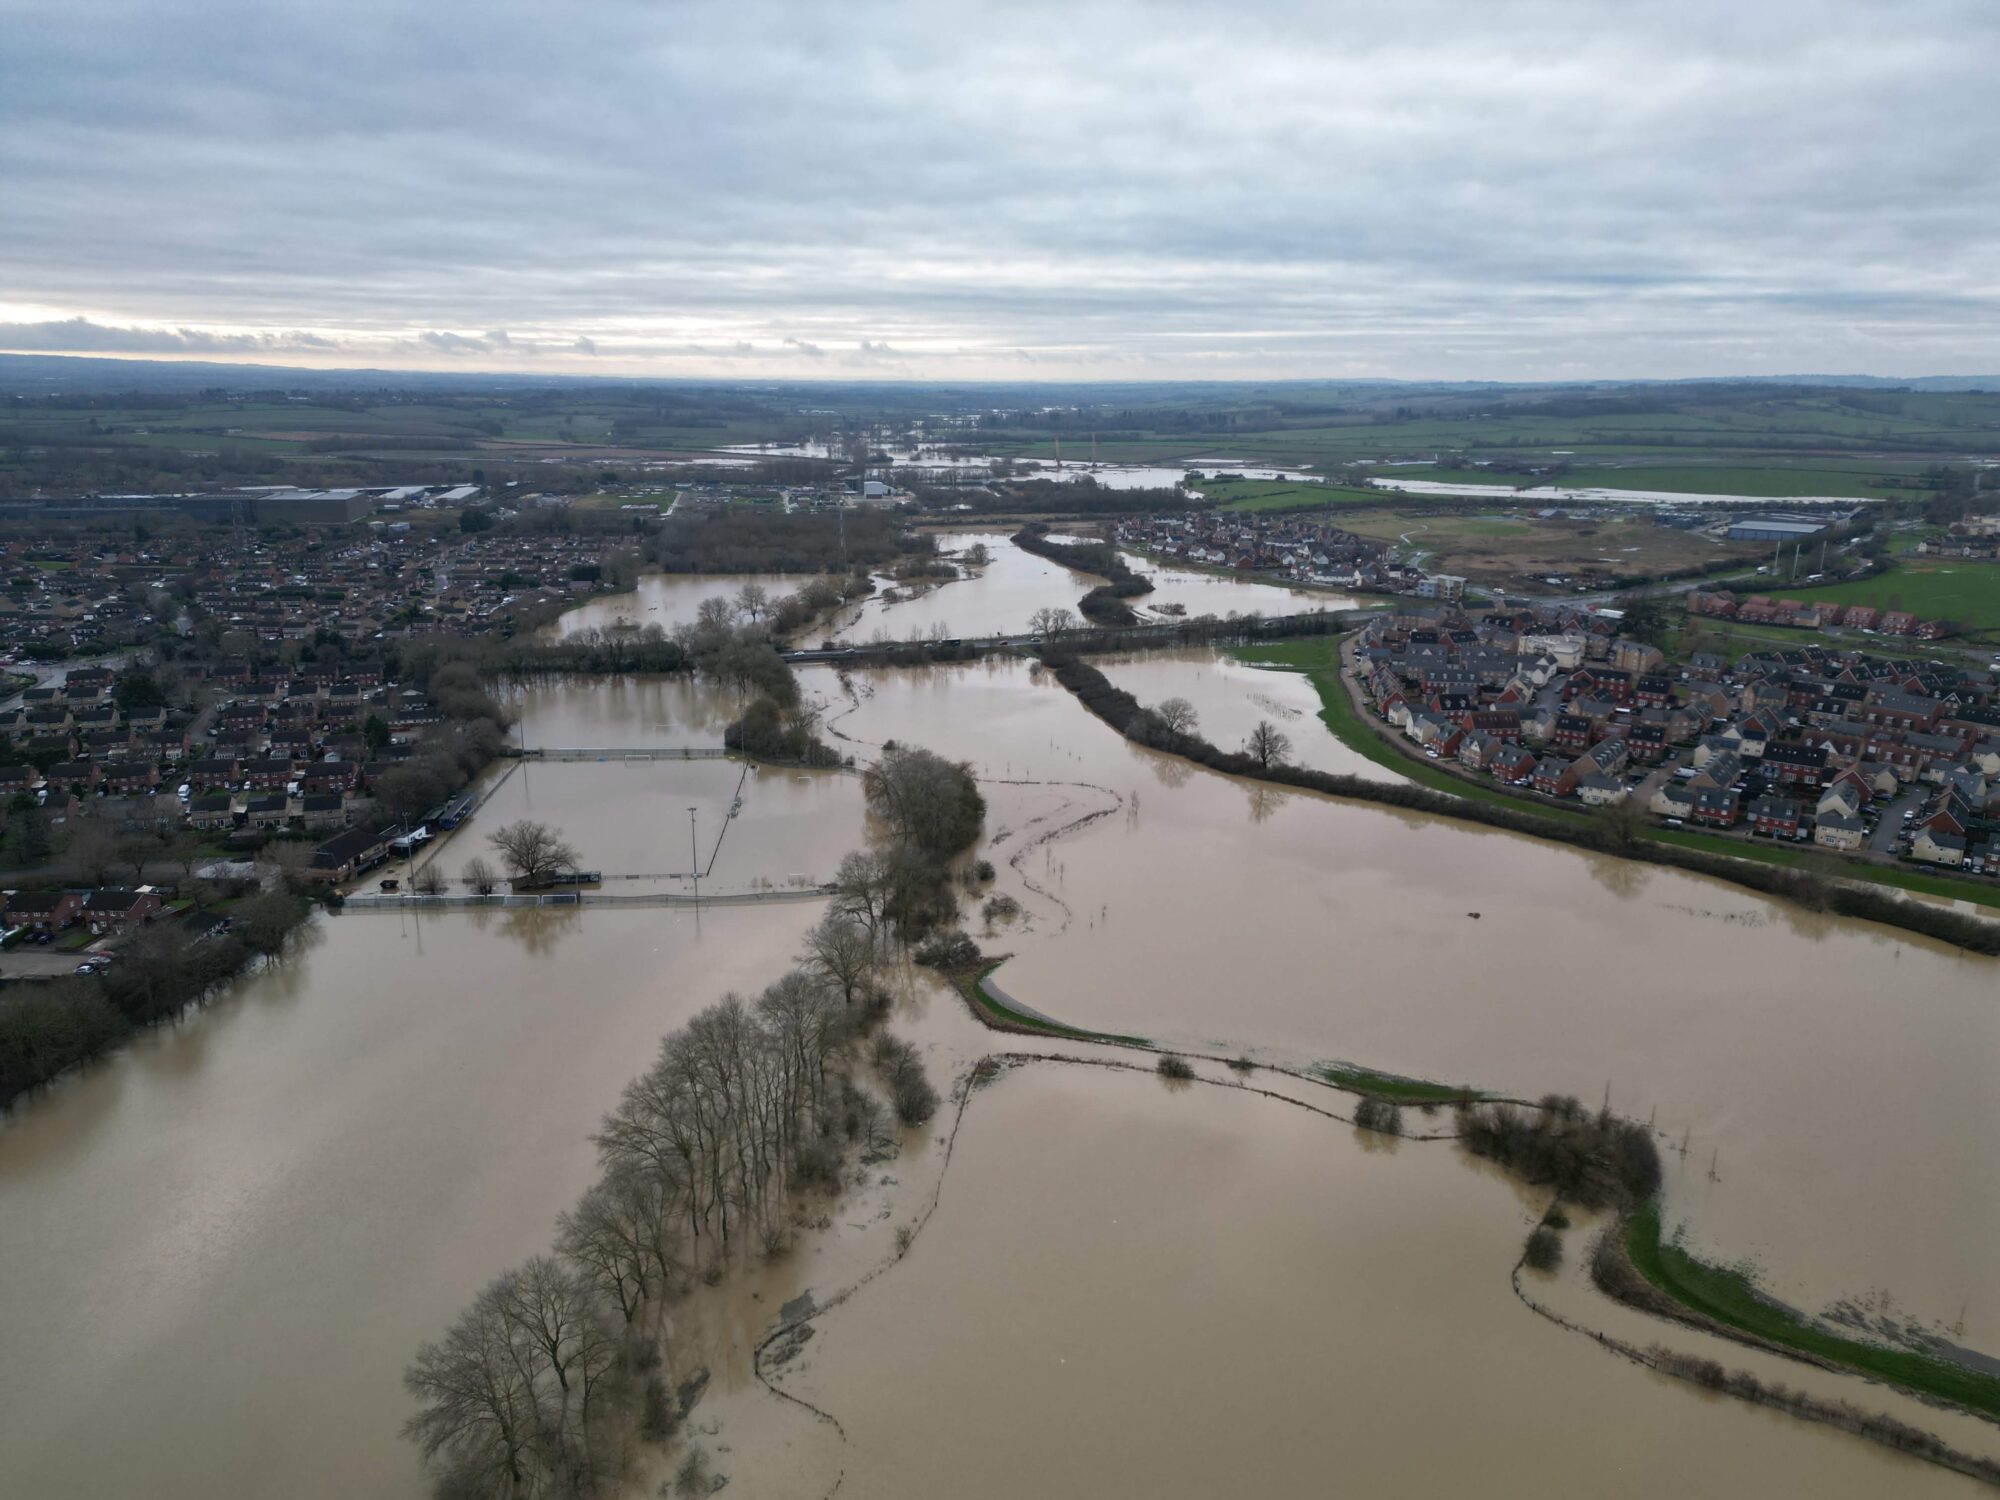 Drone imagery of flood waters. Stretch of flood water separating Haydon Hill and Berryfields in north Aylesbury. This area is usually green fields. The floodplains are working hard. By skyeyweimagery.com